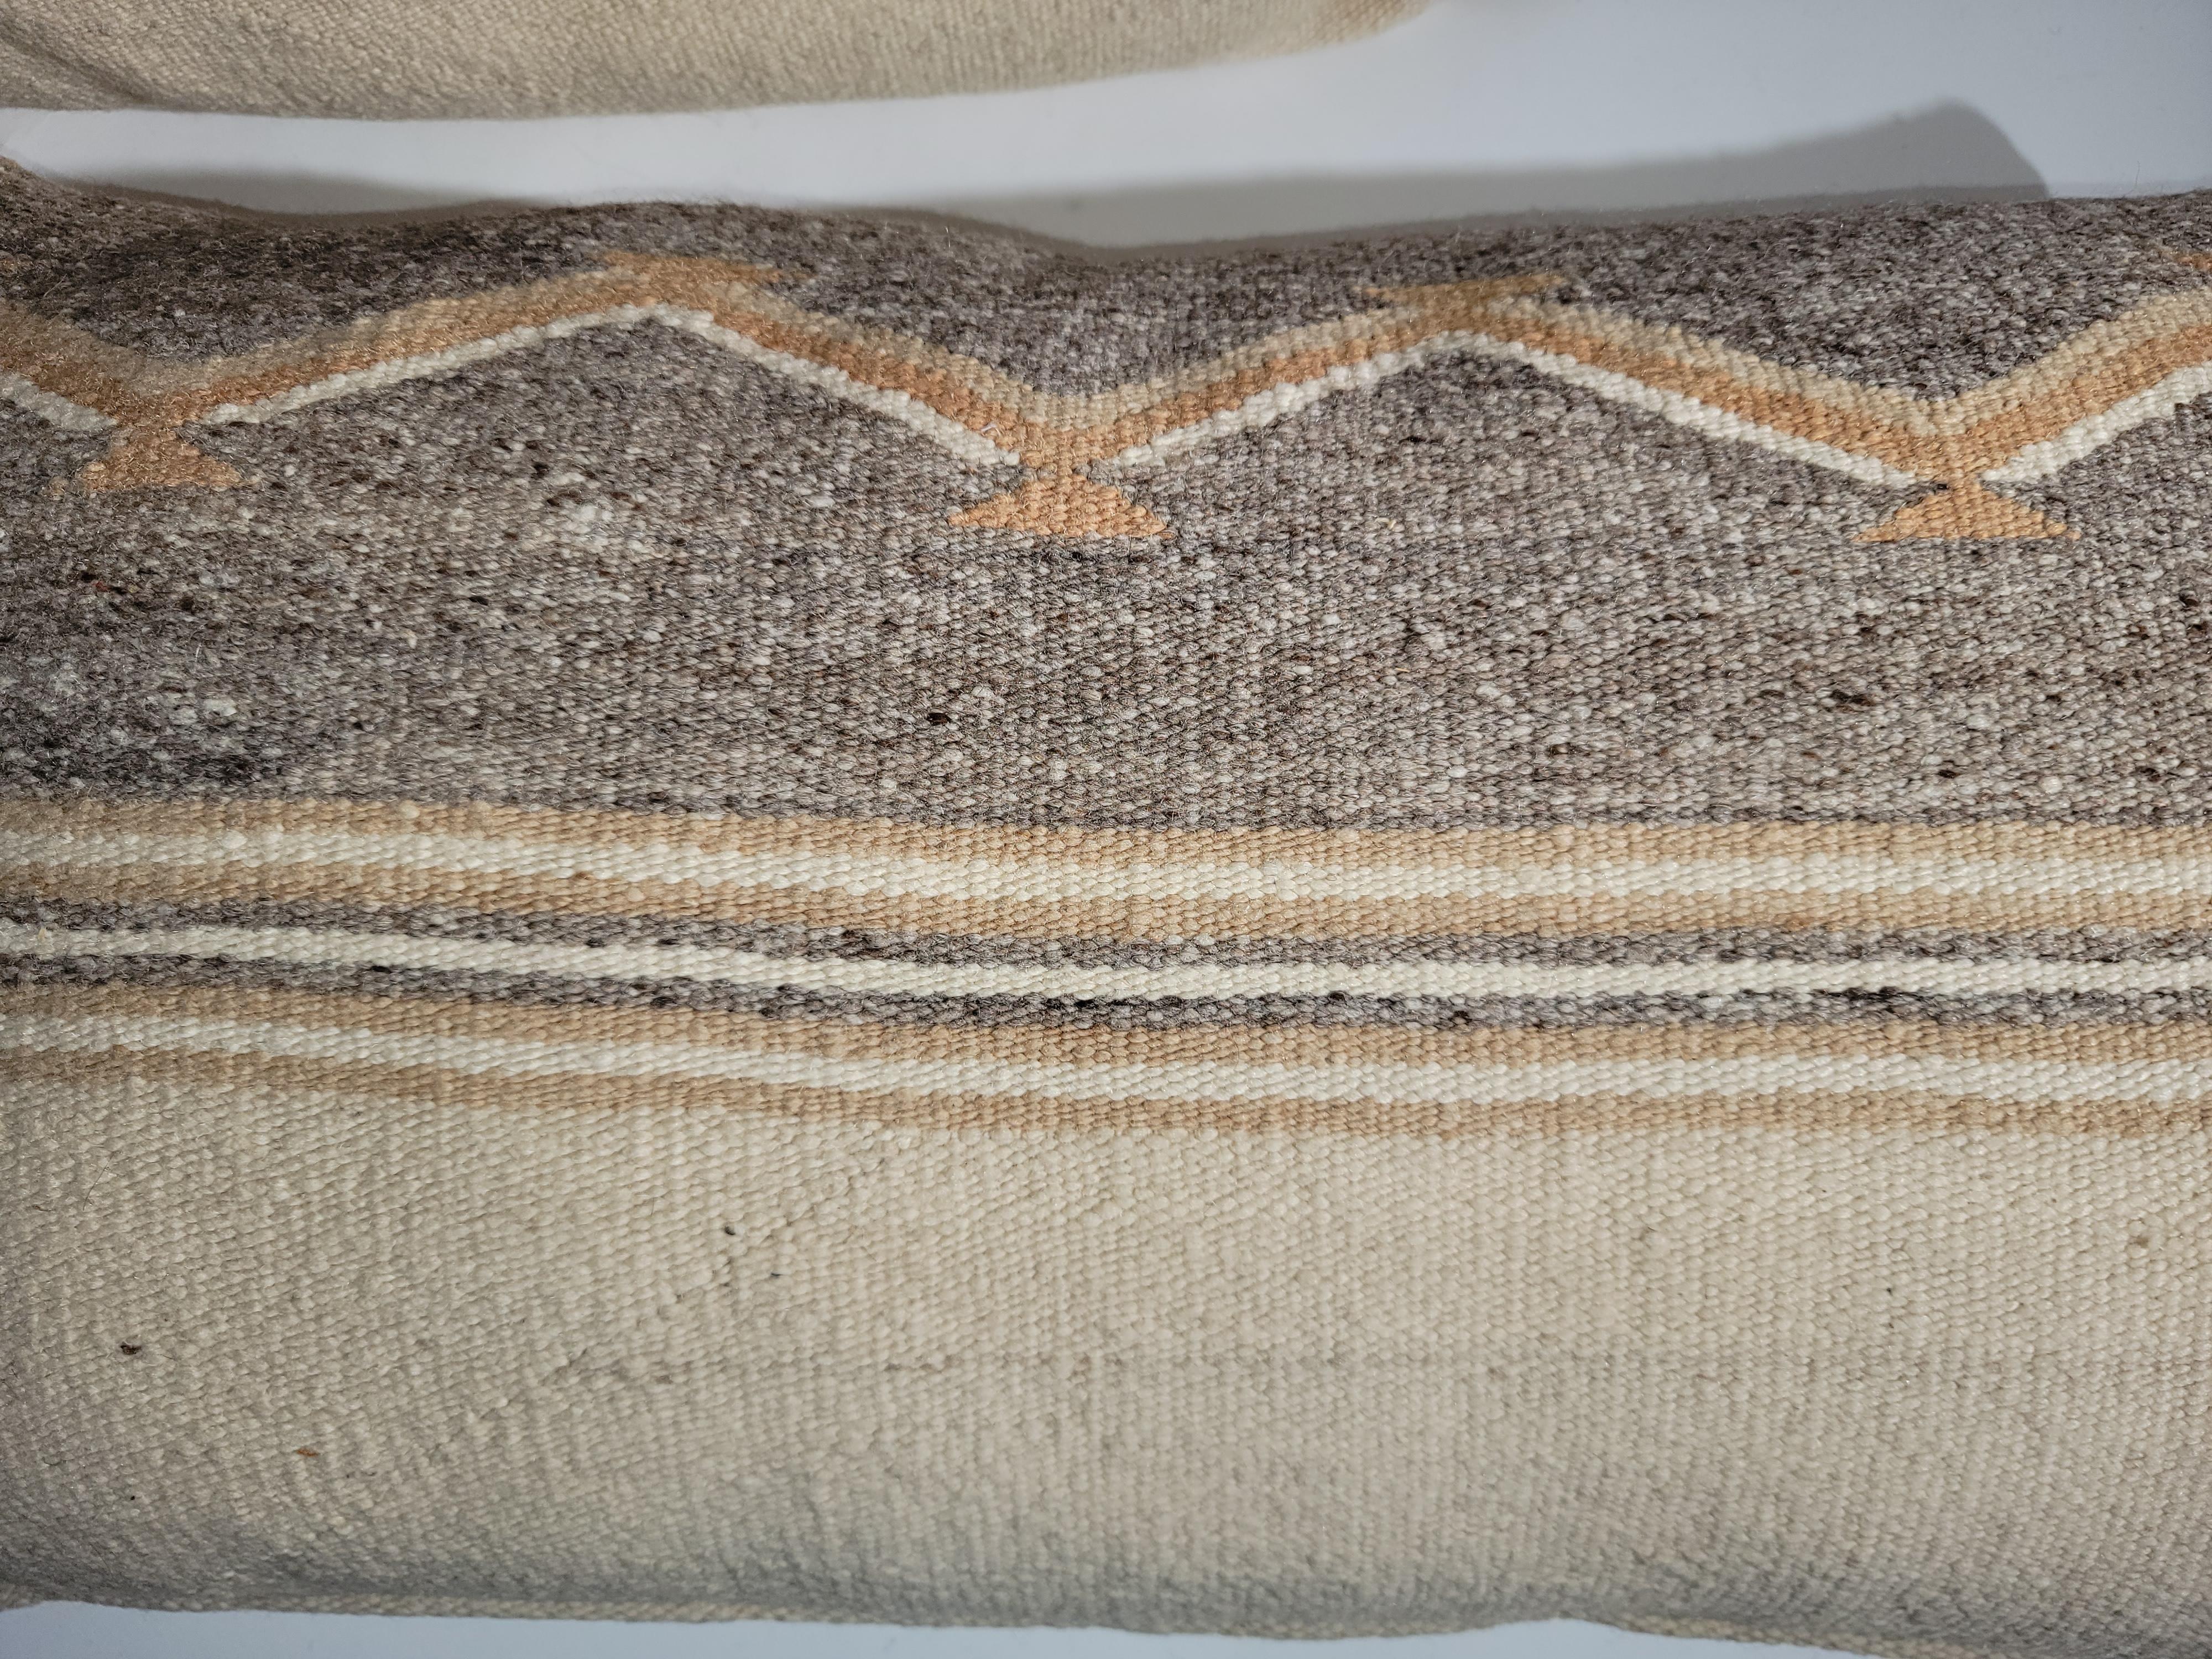 Pair of Navajo Bolster pillows in an beautiful natural color. great fitting in many settings. Great Adirondack feel. wonderful browns stripes with delectable mountain lines. Linen backing and down and feather inserts.